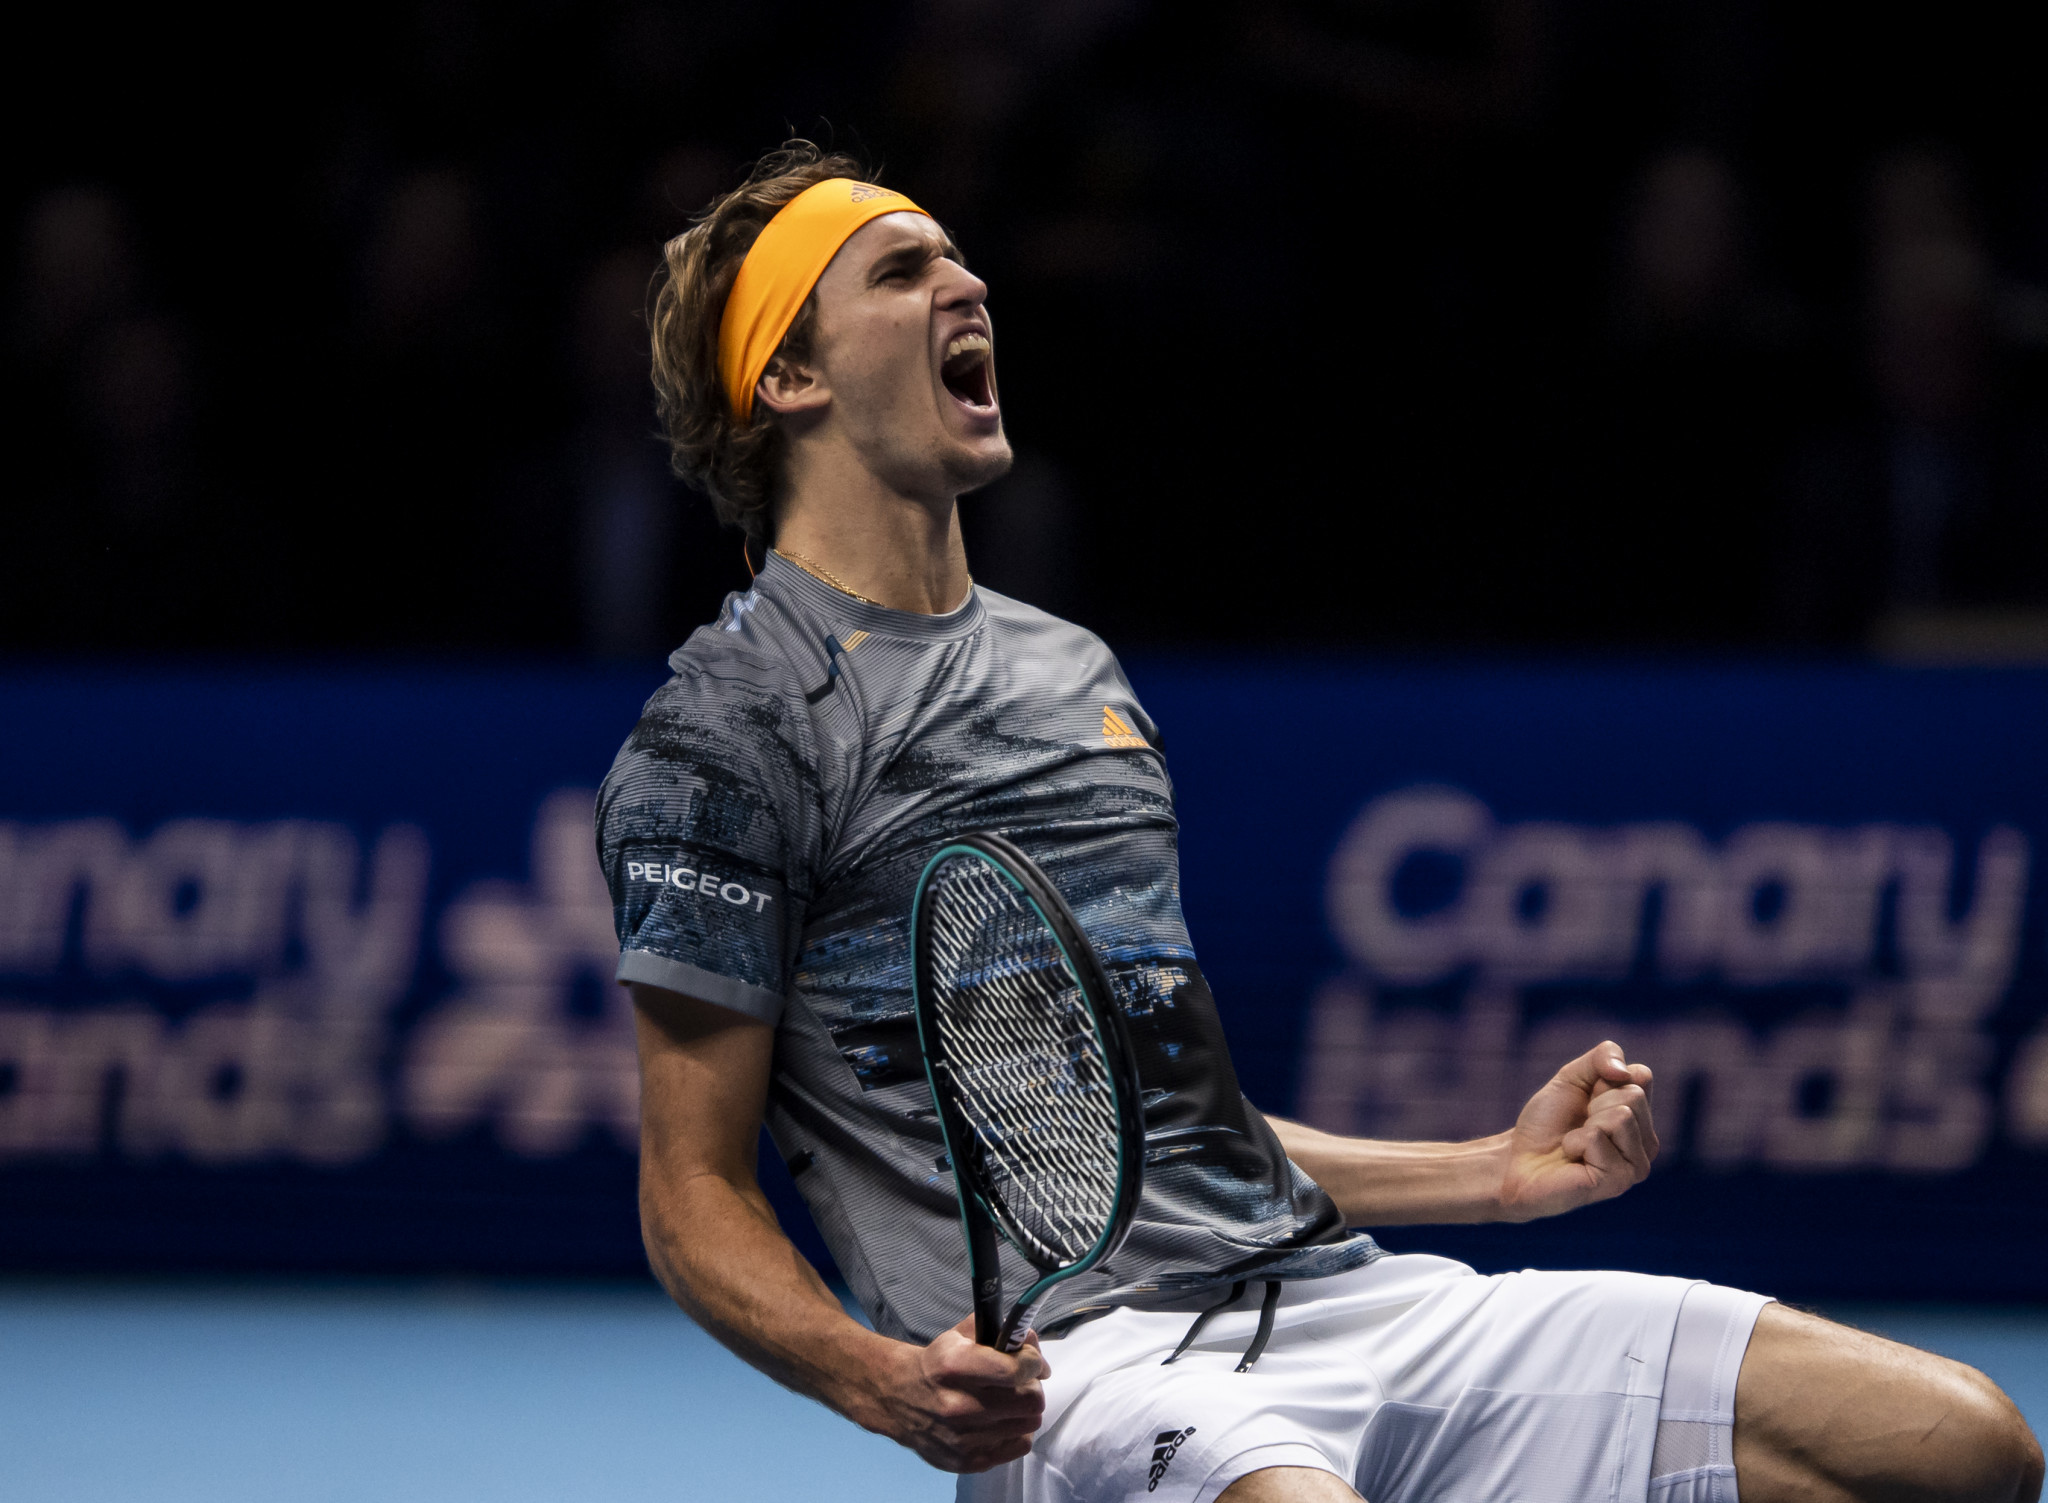 Germany's Alexander Zverev is the defending ATP Finals champion and remains on course to retain his title in London after knocking out Spain's world number one Rafael Nadal ©Getty Images 